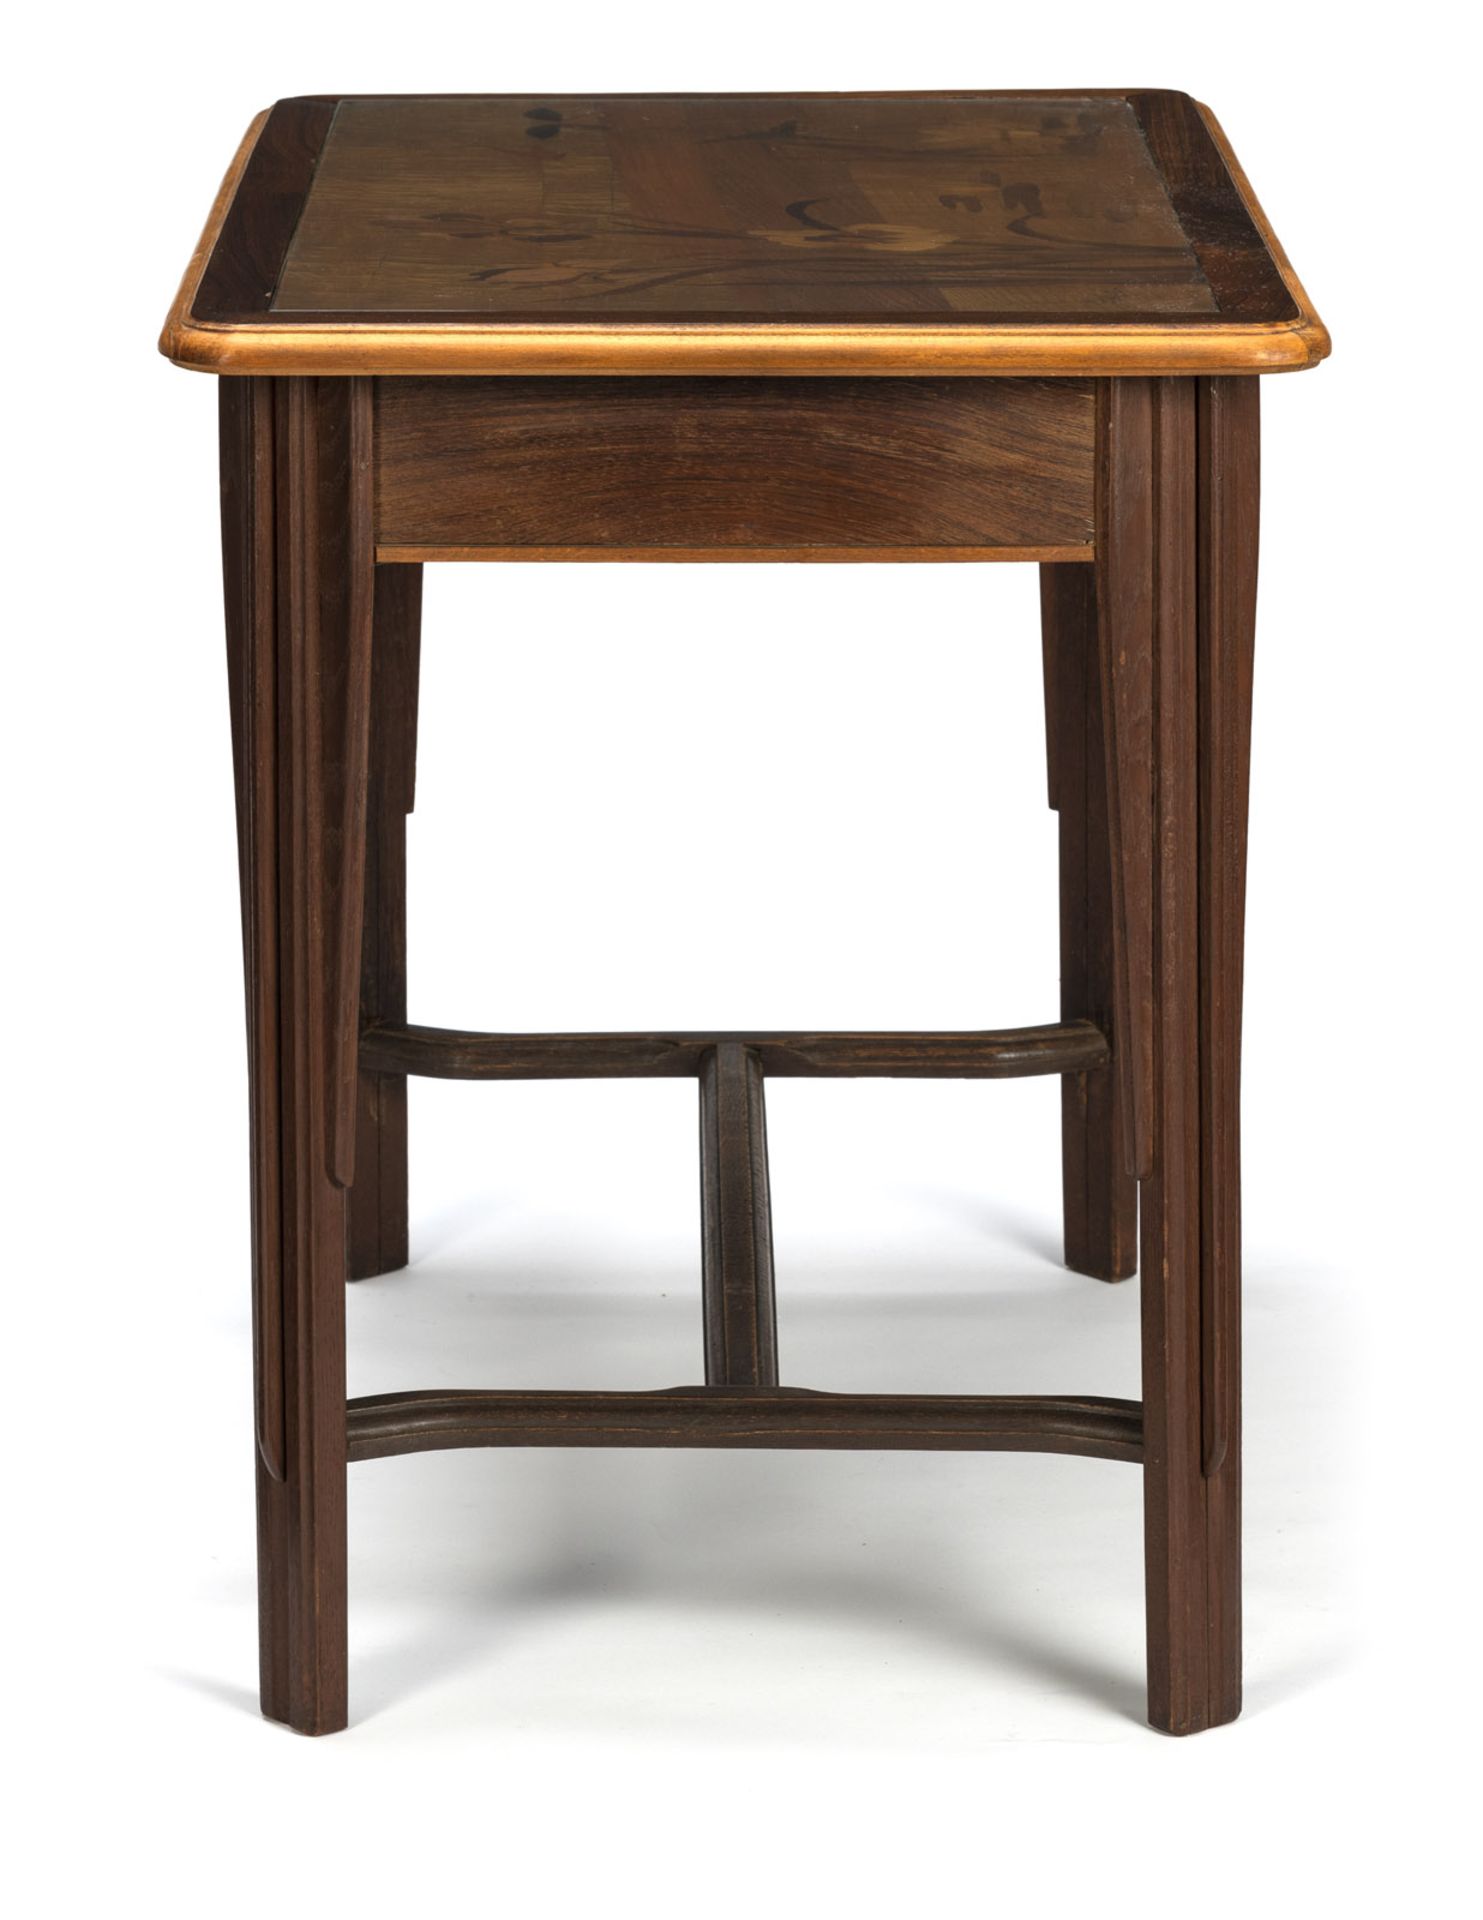 AN ART NOUVEAU FLORAL TOOLED PALISANDER, OAKWOOD, MAHOGANY, ROOTWOOD AND ASH WRITING DESK - Image 6 of 8